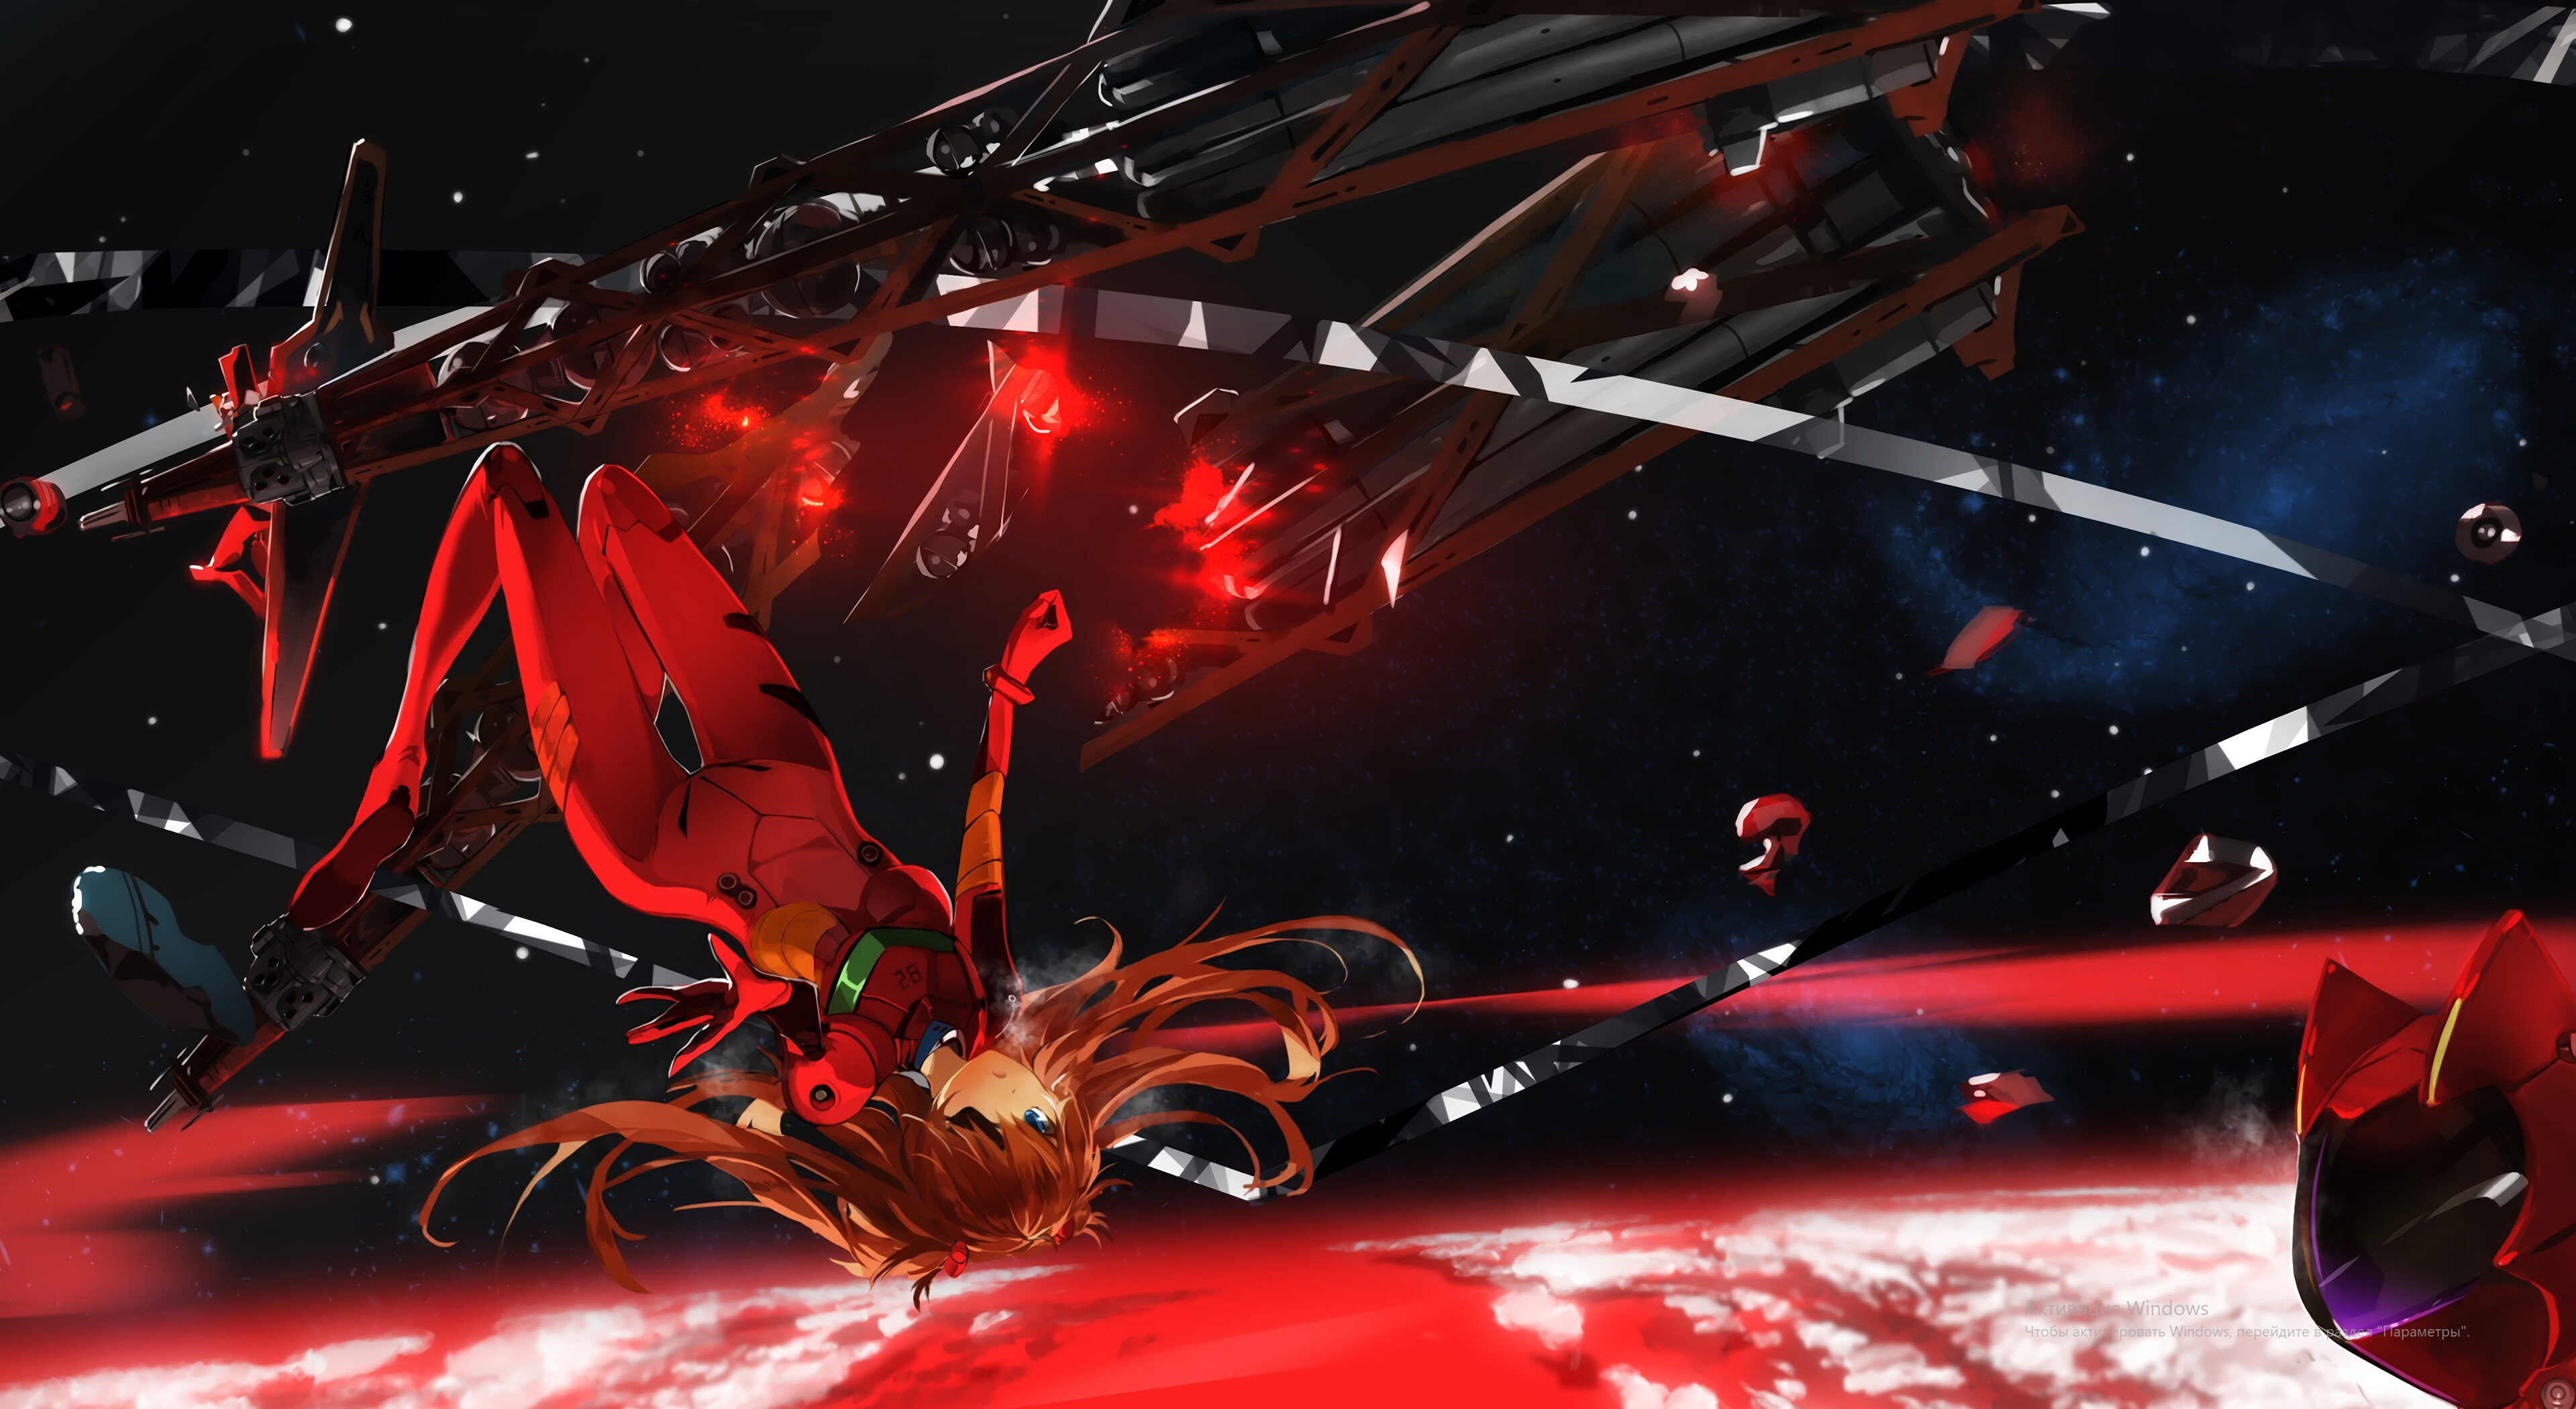 Evangelion: 3.0+1.0 Thrice Upon a Time: Part of the Neon Genesis Evangelion franchise, Produced by Studio Khara. 3840x2100 HD Background.